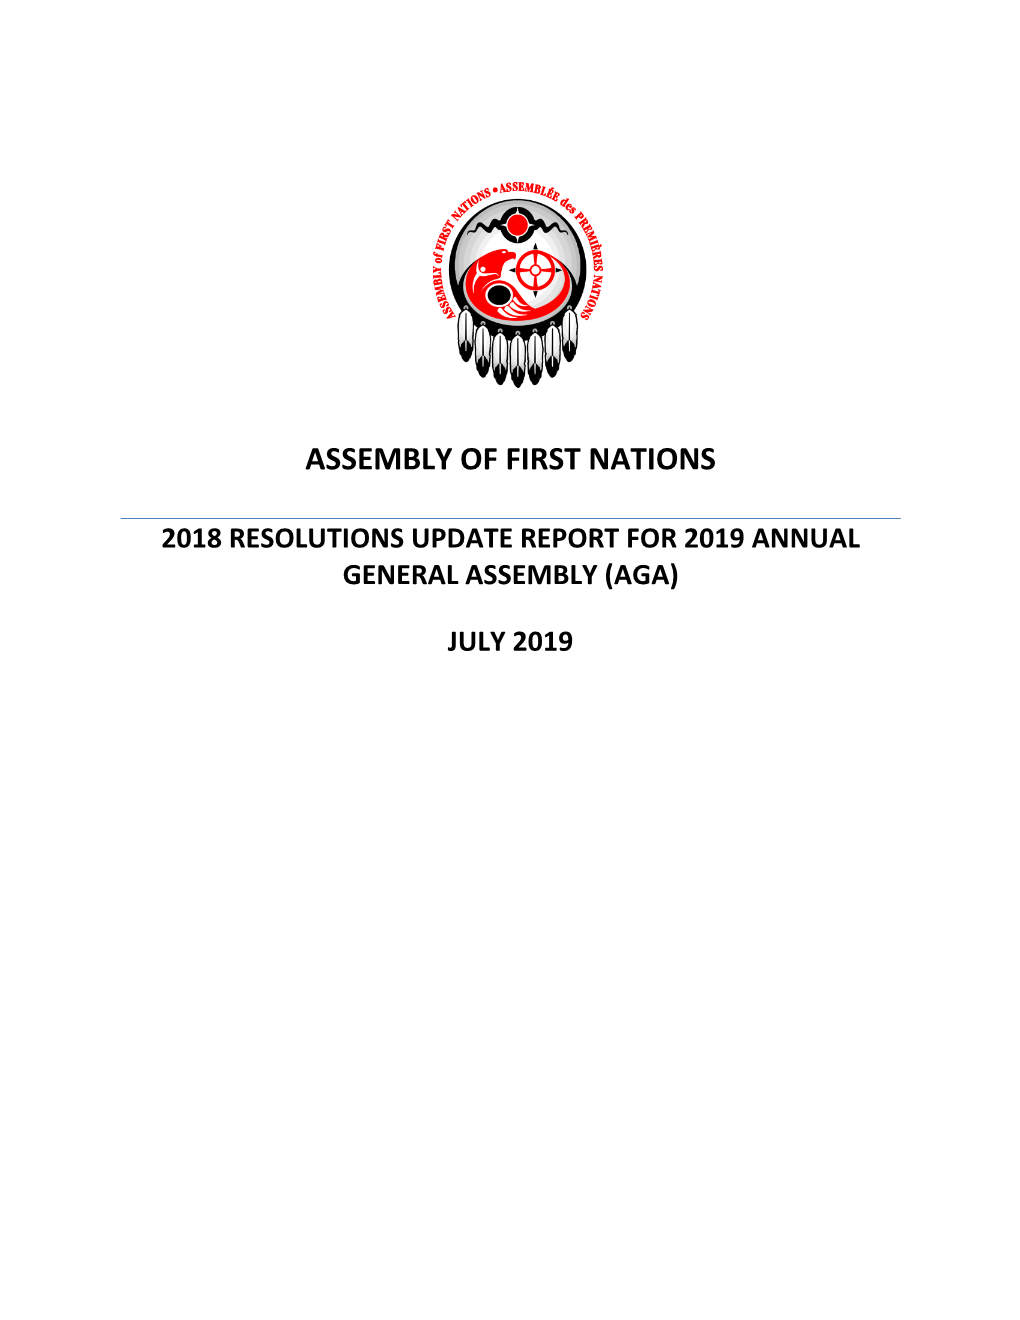 2018 Resolutions Update Report for 2019 Annual General Assembly (Aga)